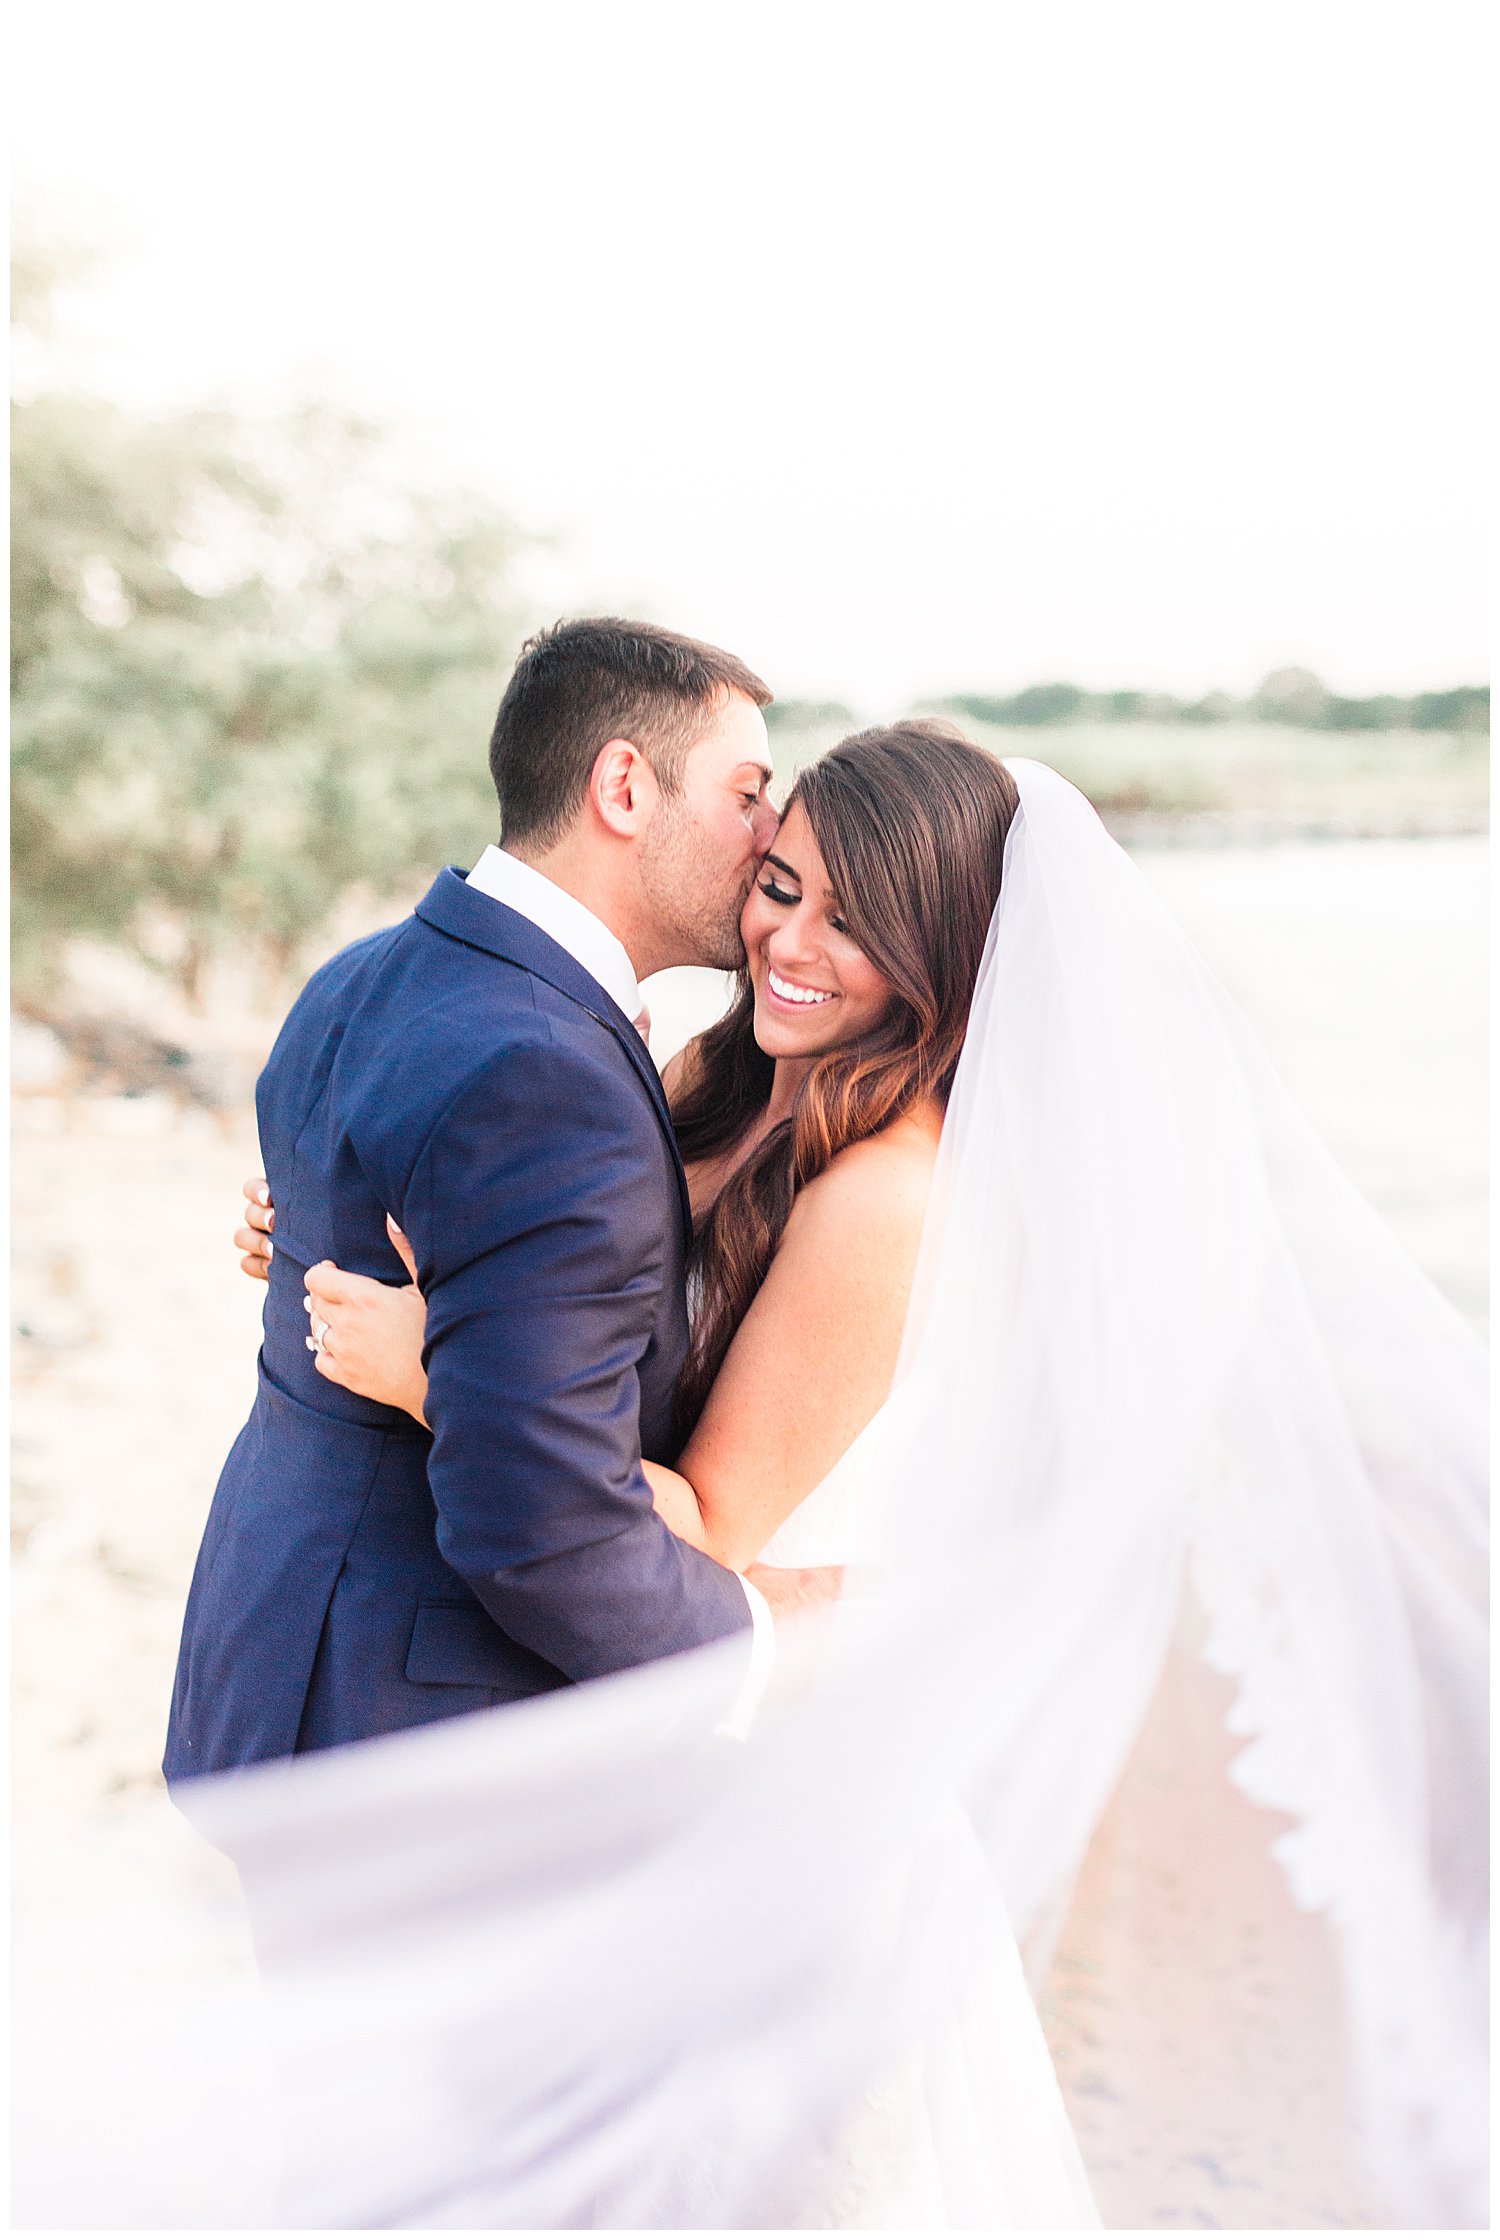 Bride and groom portrait with veil